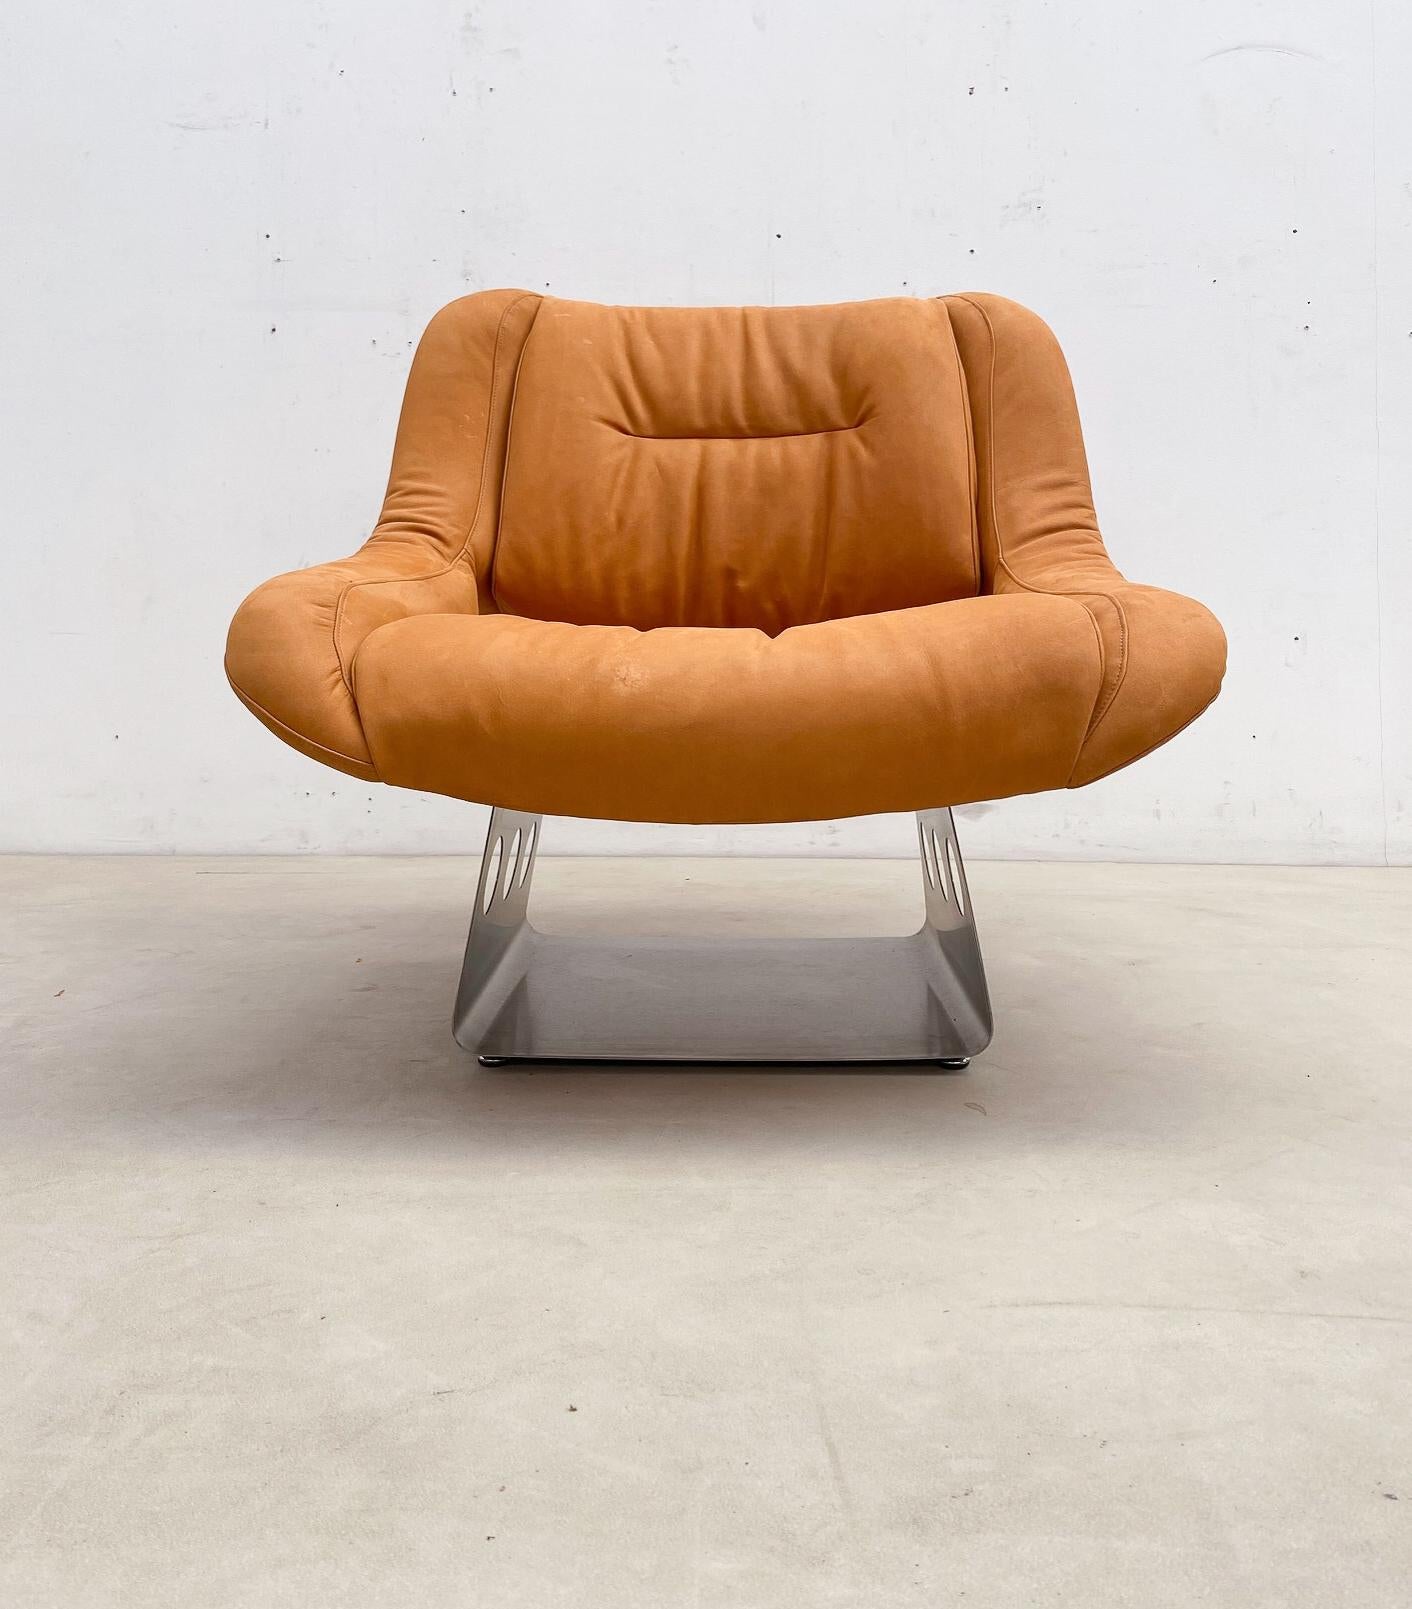 Italian Mid-Century Lounge Chair and Ottoman, Italy, 1970s - New Leather Upholstery For Sale